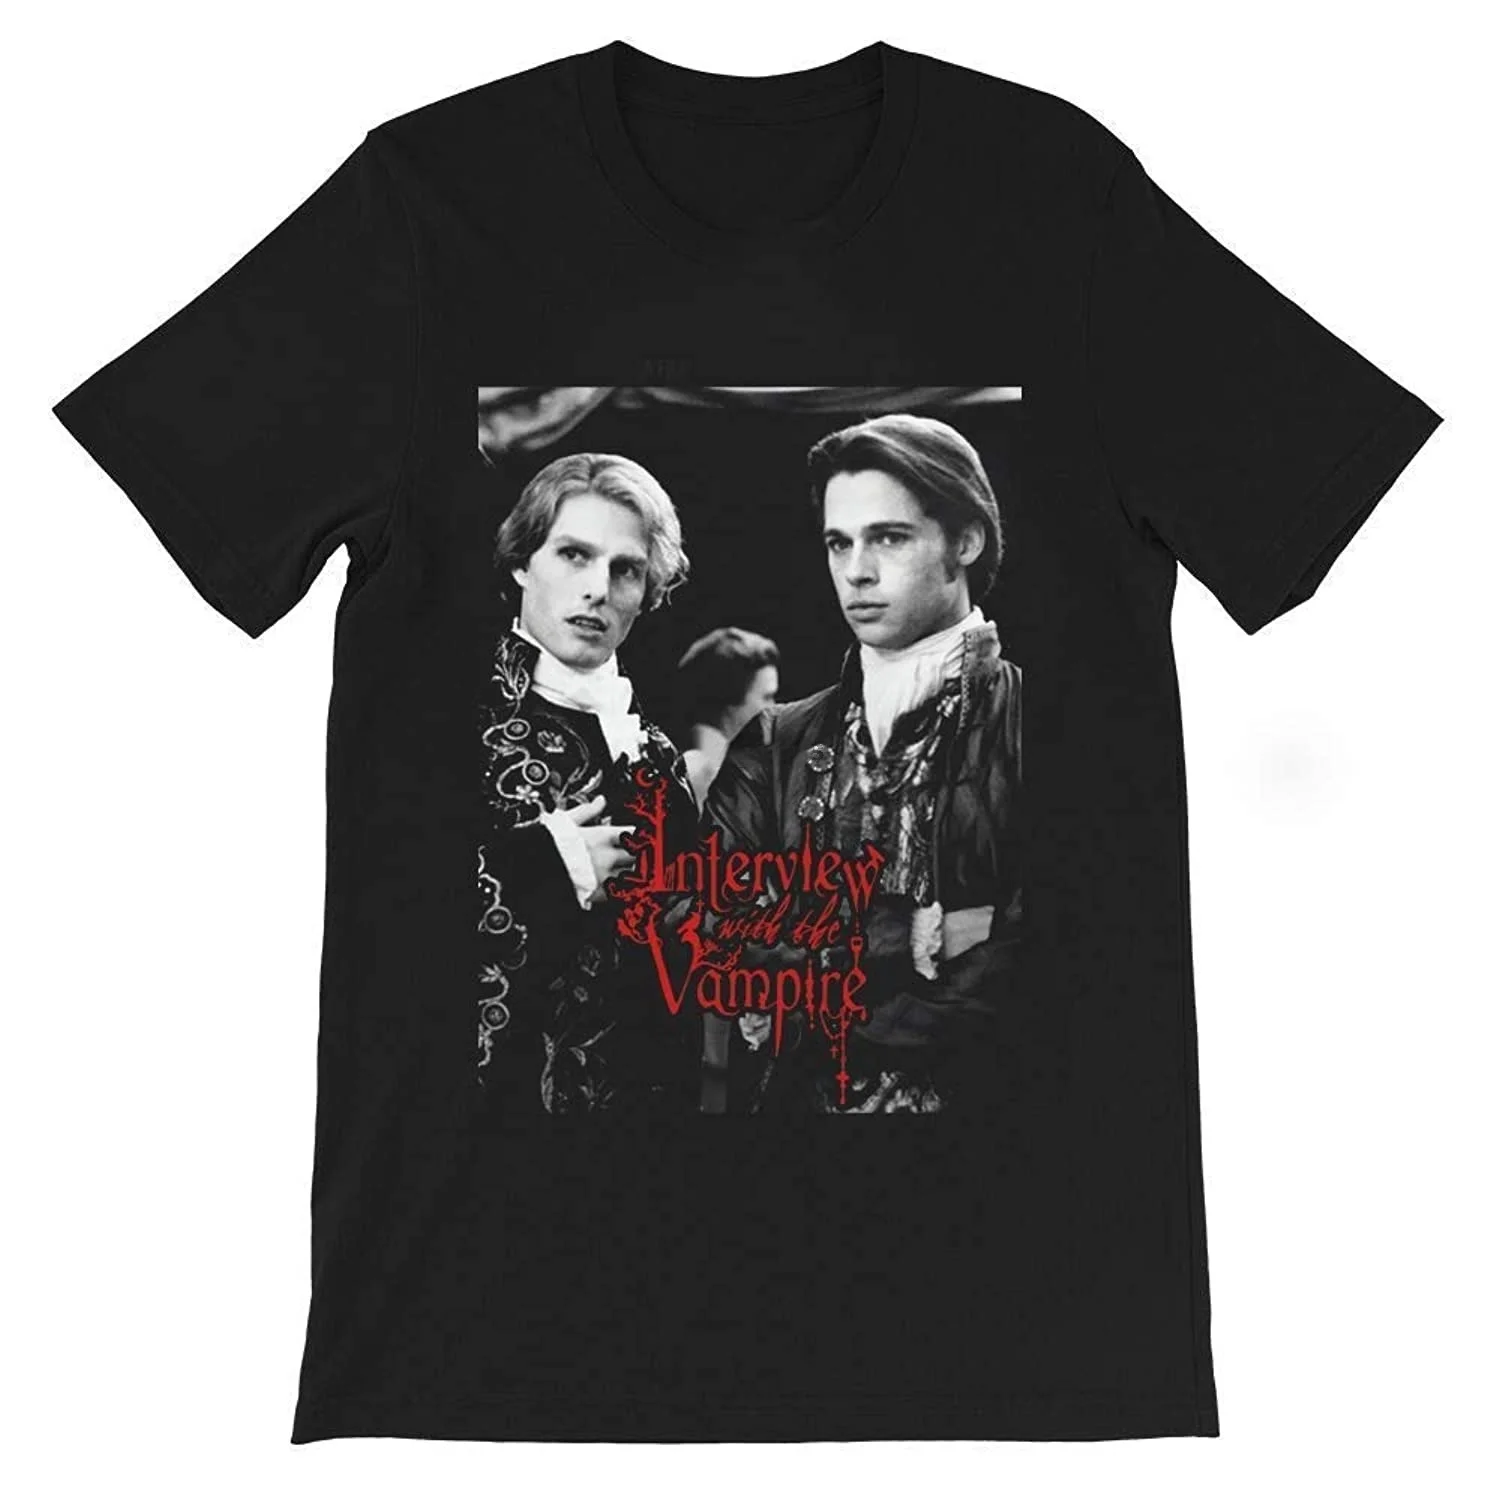 

Interview with The Vampire Lestat and Louis Victorian Darkness Gift for Men Women Girl Unisex T-Shirt(1)